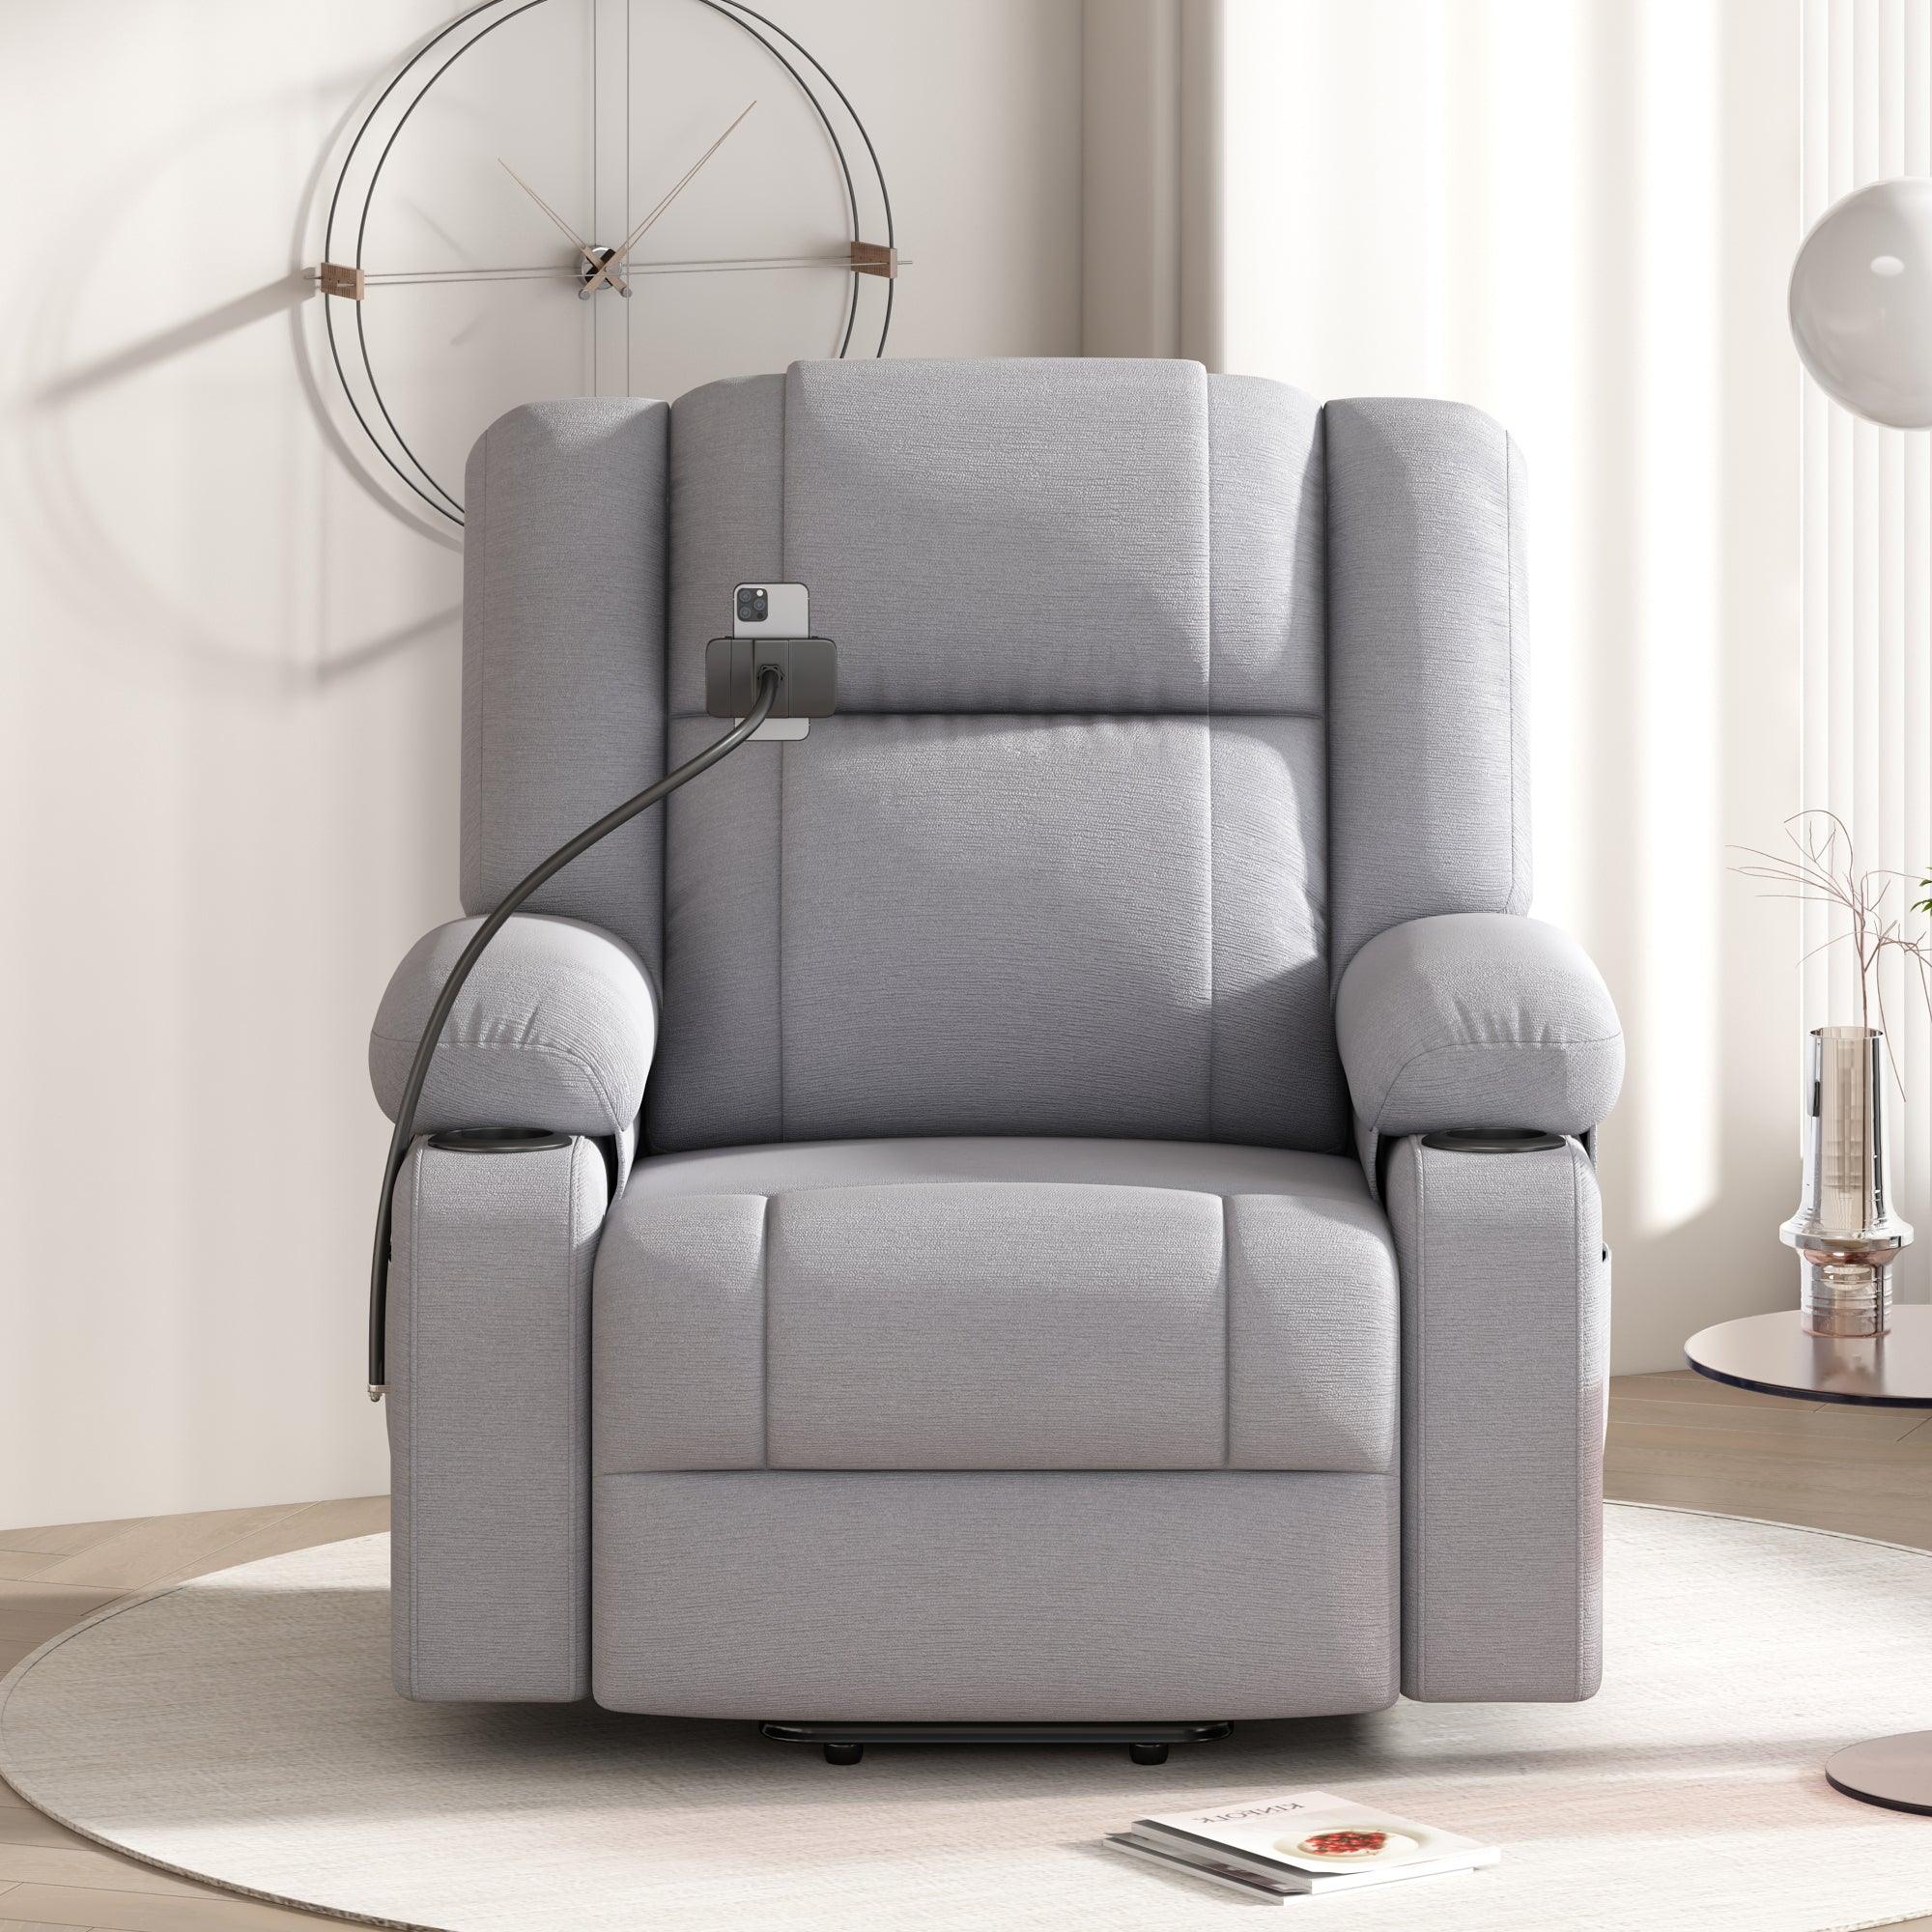 🆓🚛 Power Lift Recliner Chair Electric Recliner for Elderly Recliner Chair With Massage & Heating Functions, Remote, Phone Holder Side Pockets & Cup Holders for Living Room, Gray